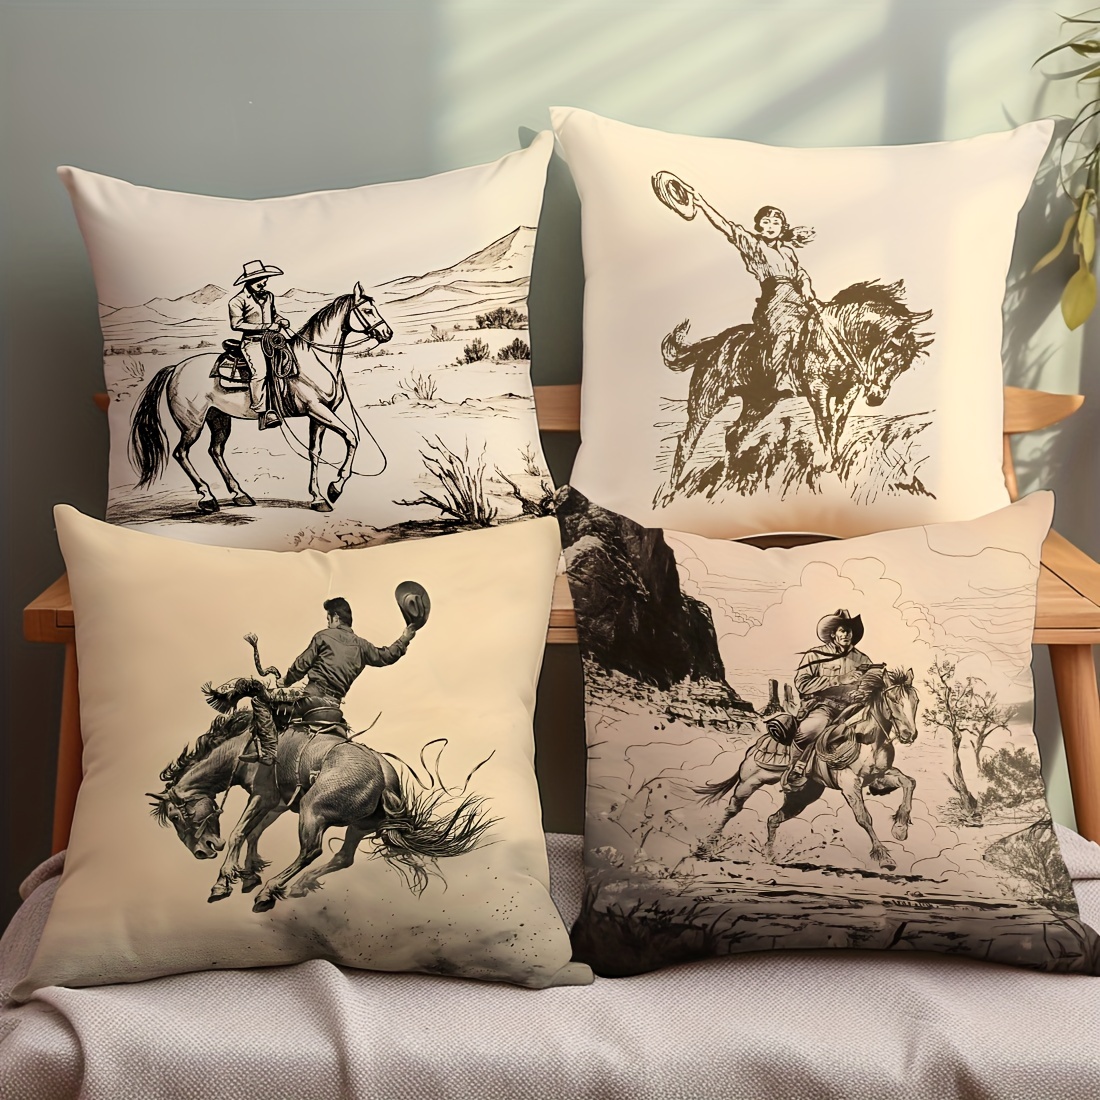 

4pcs, 18"x18" (45x45cm), Rustic Western Horse Riding, American West, Peach Skin Velvet Pillow Covers, Car Cushion, Sofa, Bedroom, Headboard Pillow Cases, Single-sided Print, Home Decor Without Insert